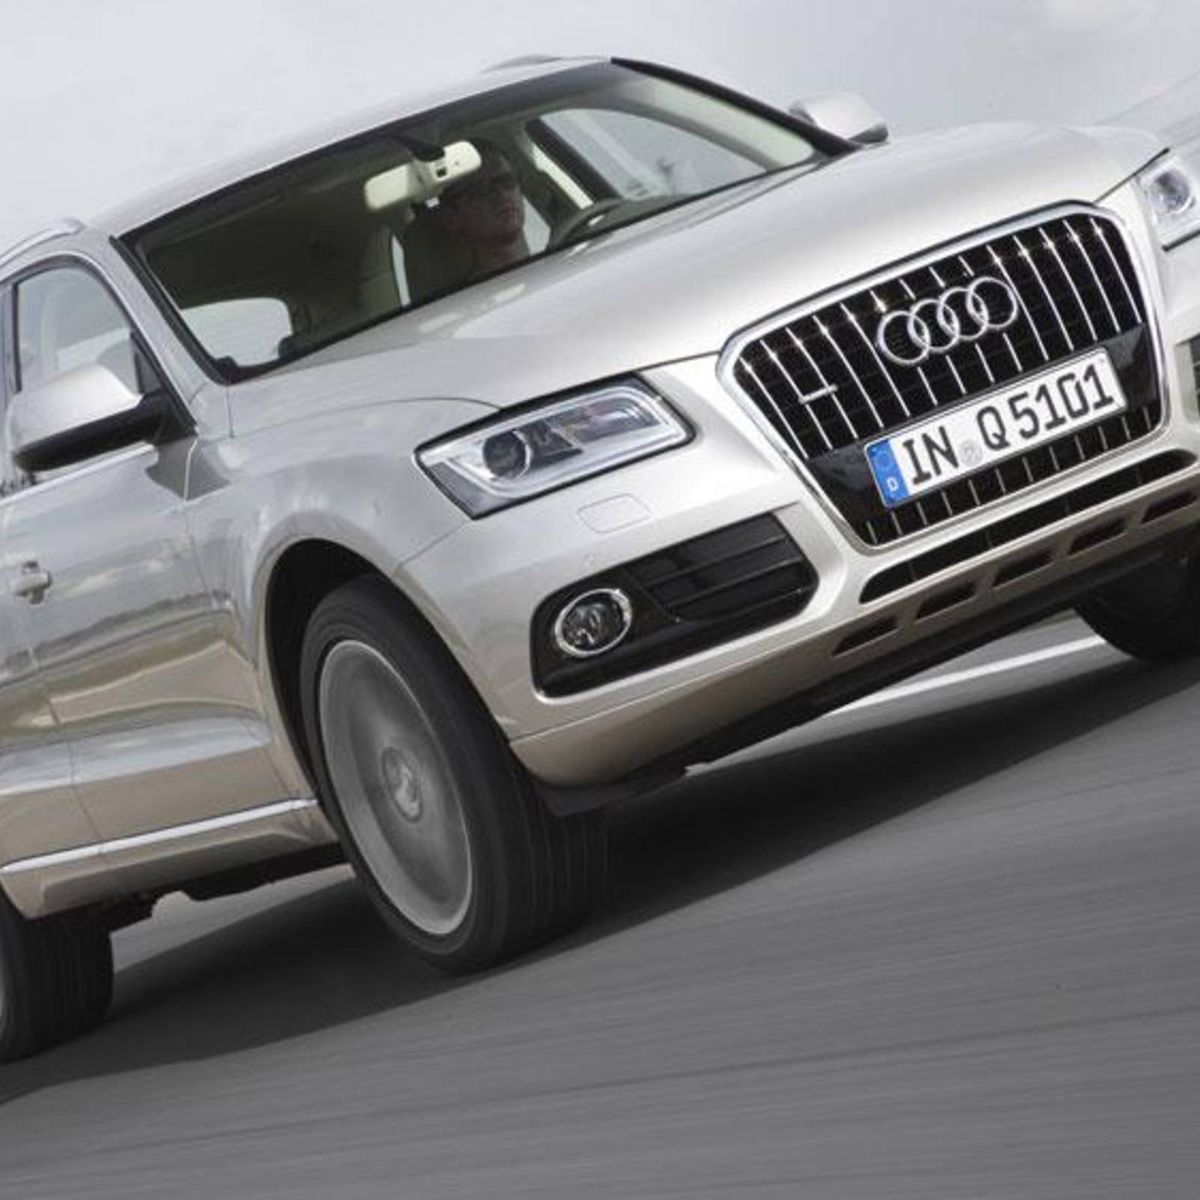 2013 Audi Q5 drive review: Engine upgrades, facelift boost the midsize SUV